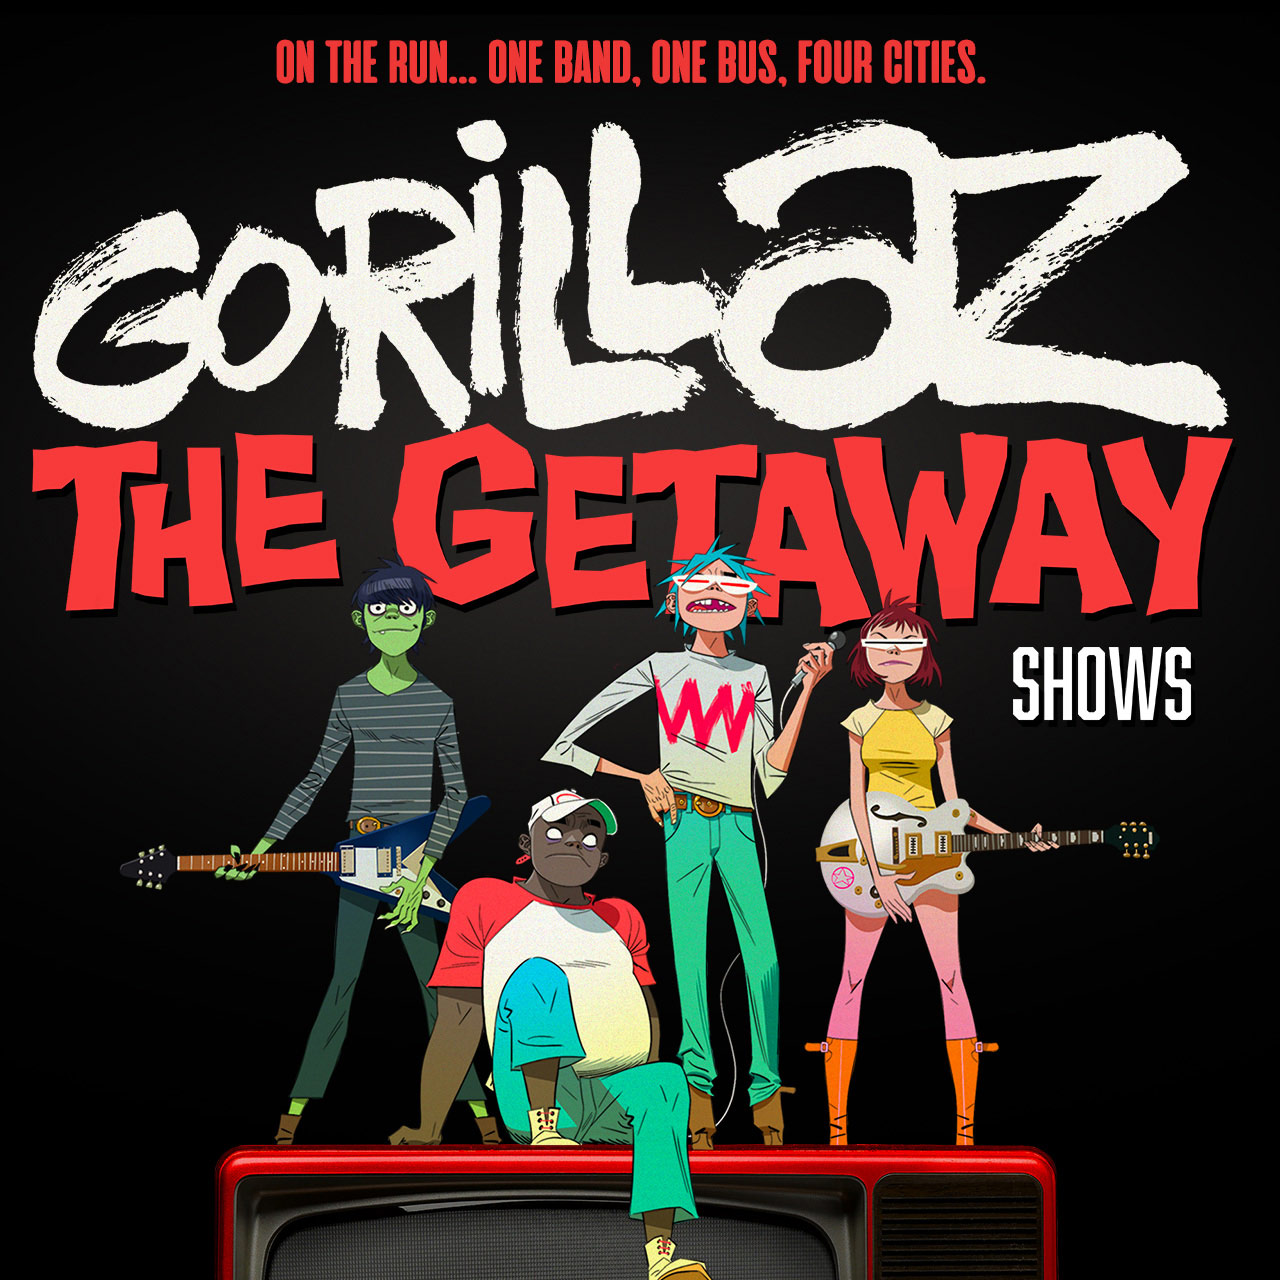 THE GETAWAY SHOWS